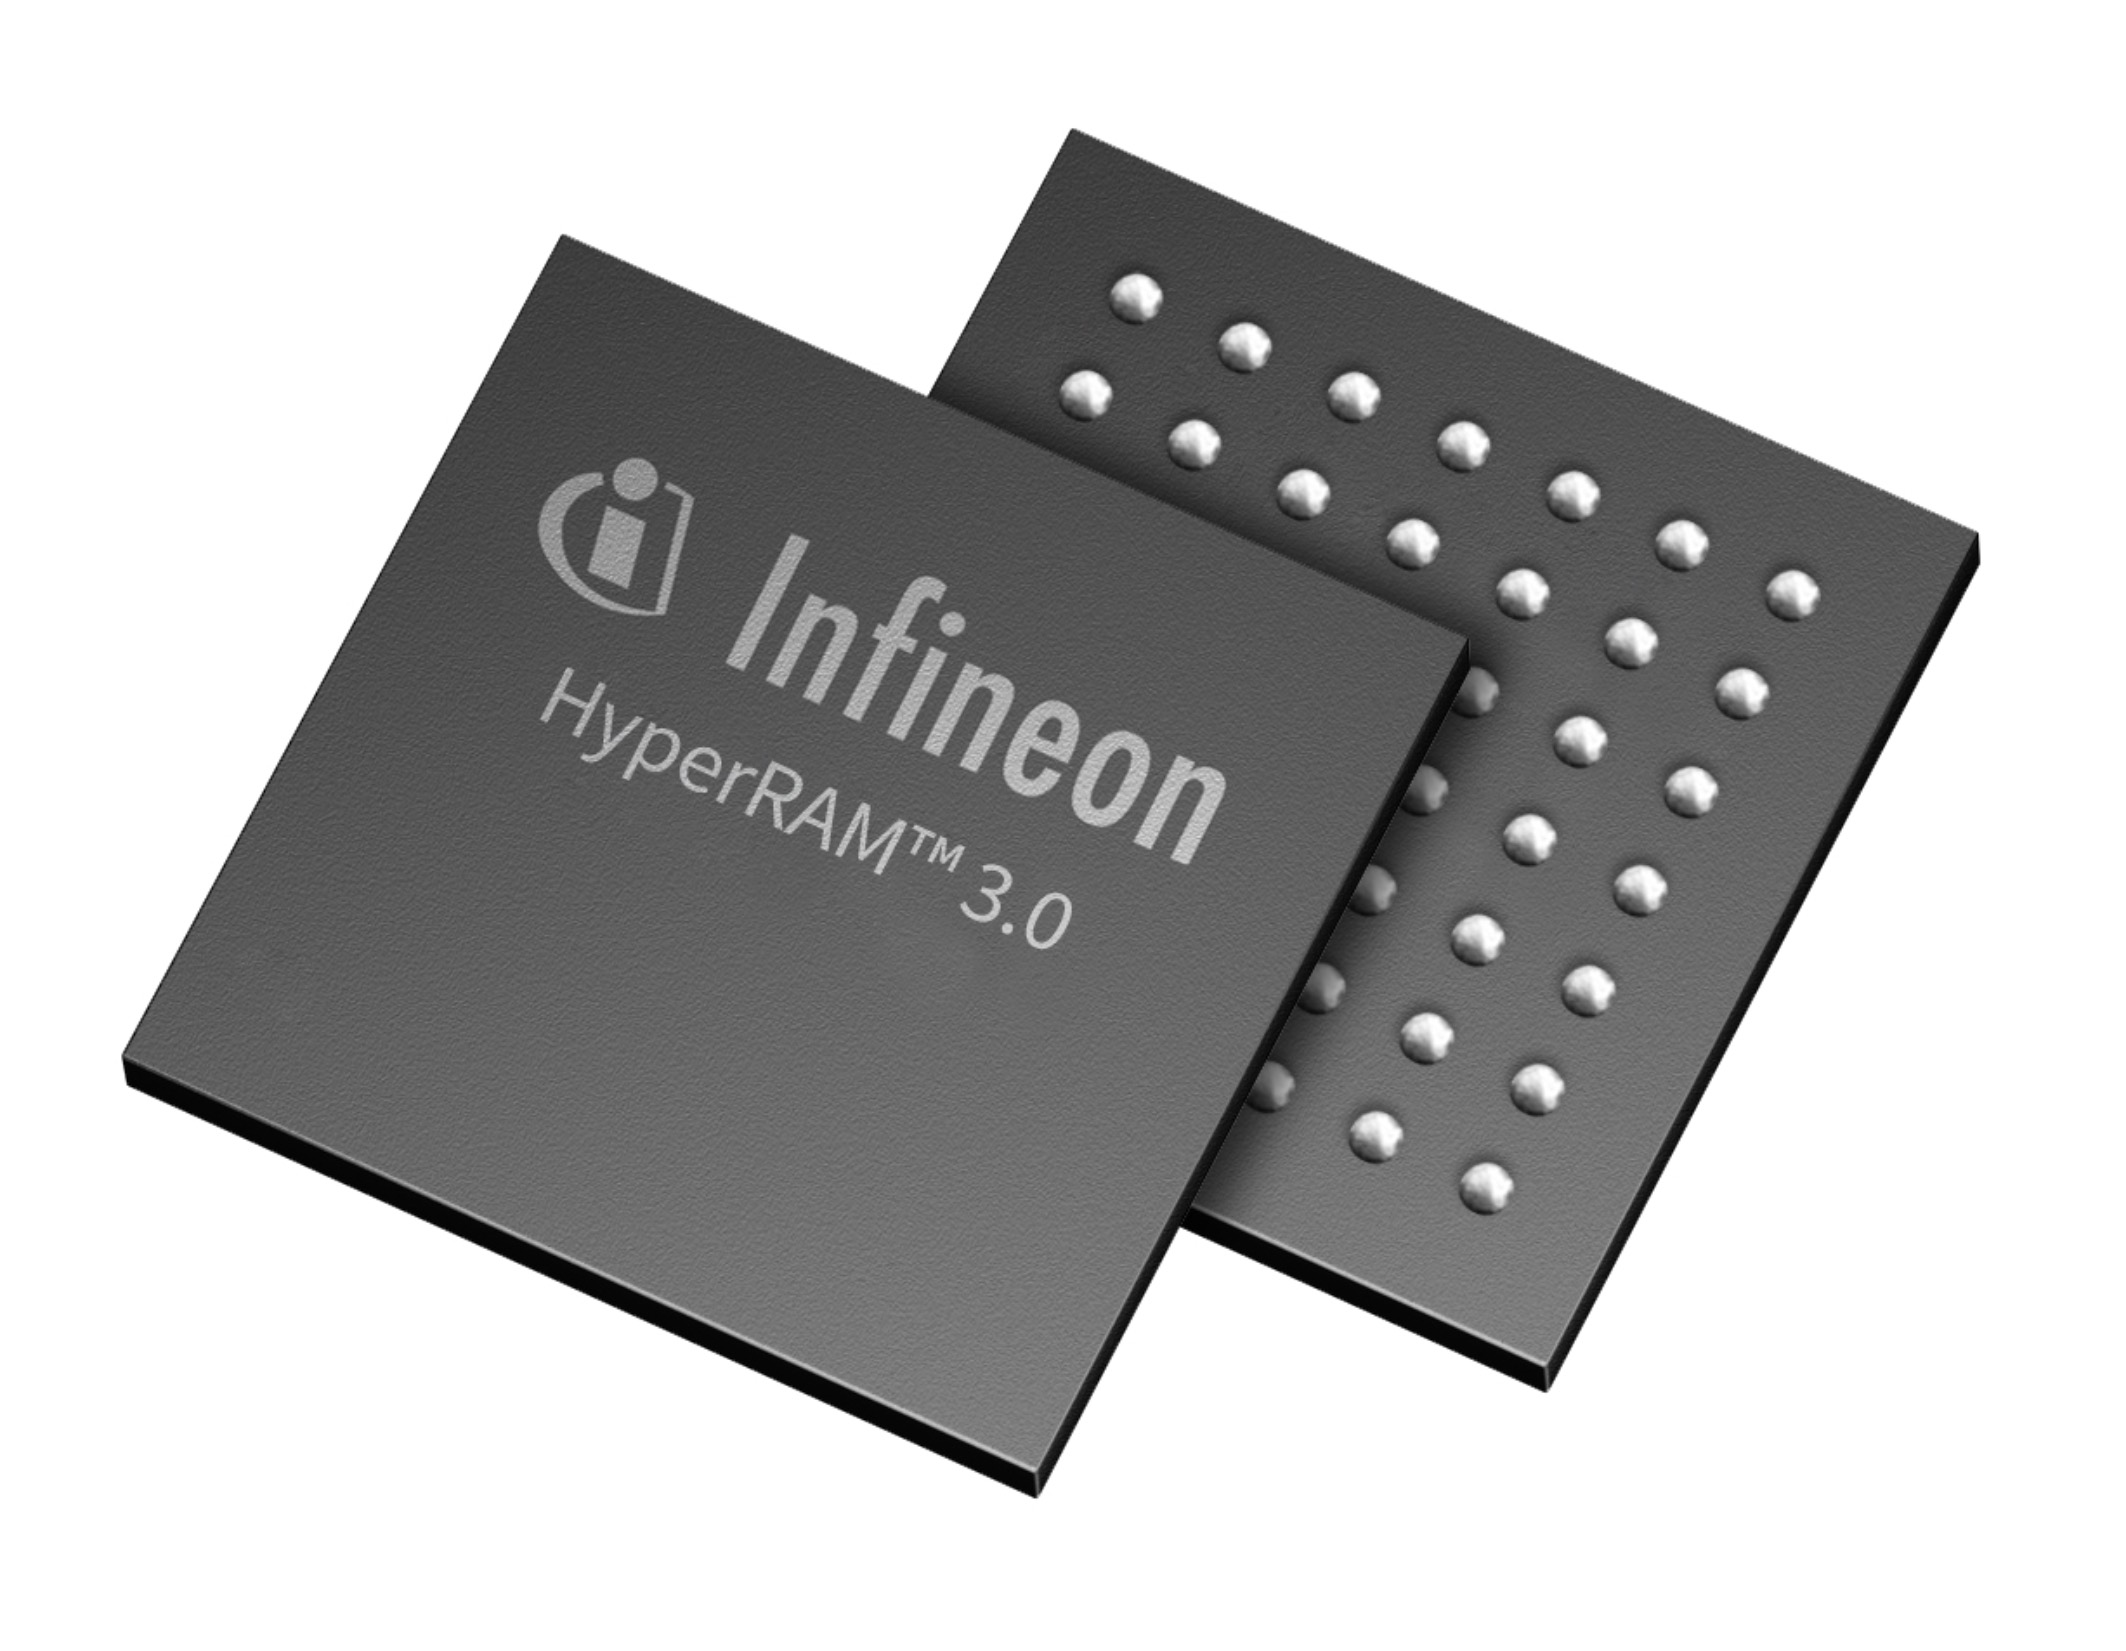 Memory Chip Doubles Bandwidth for Low Pin-Count, High-Performance Solutions